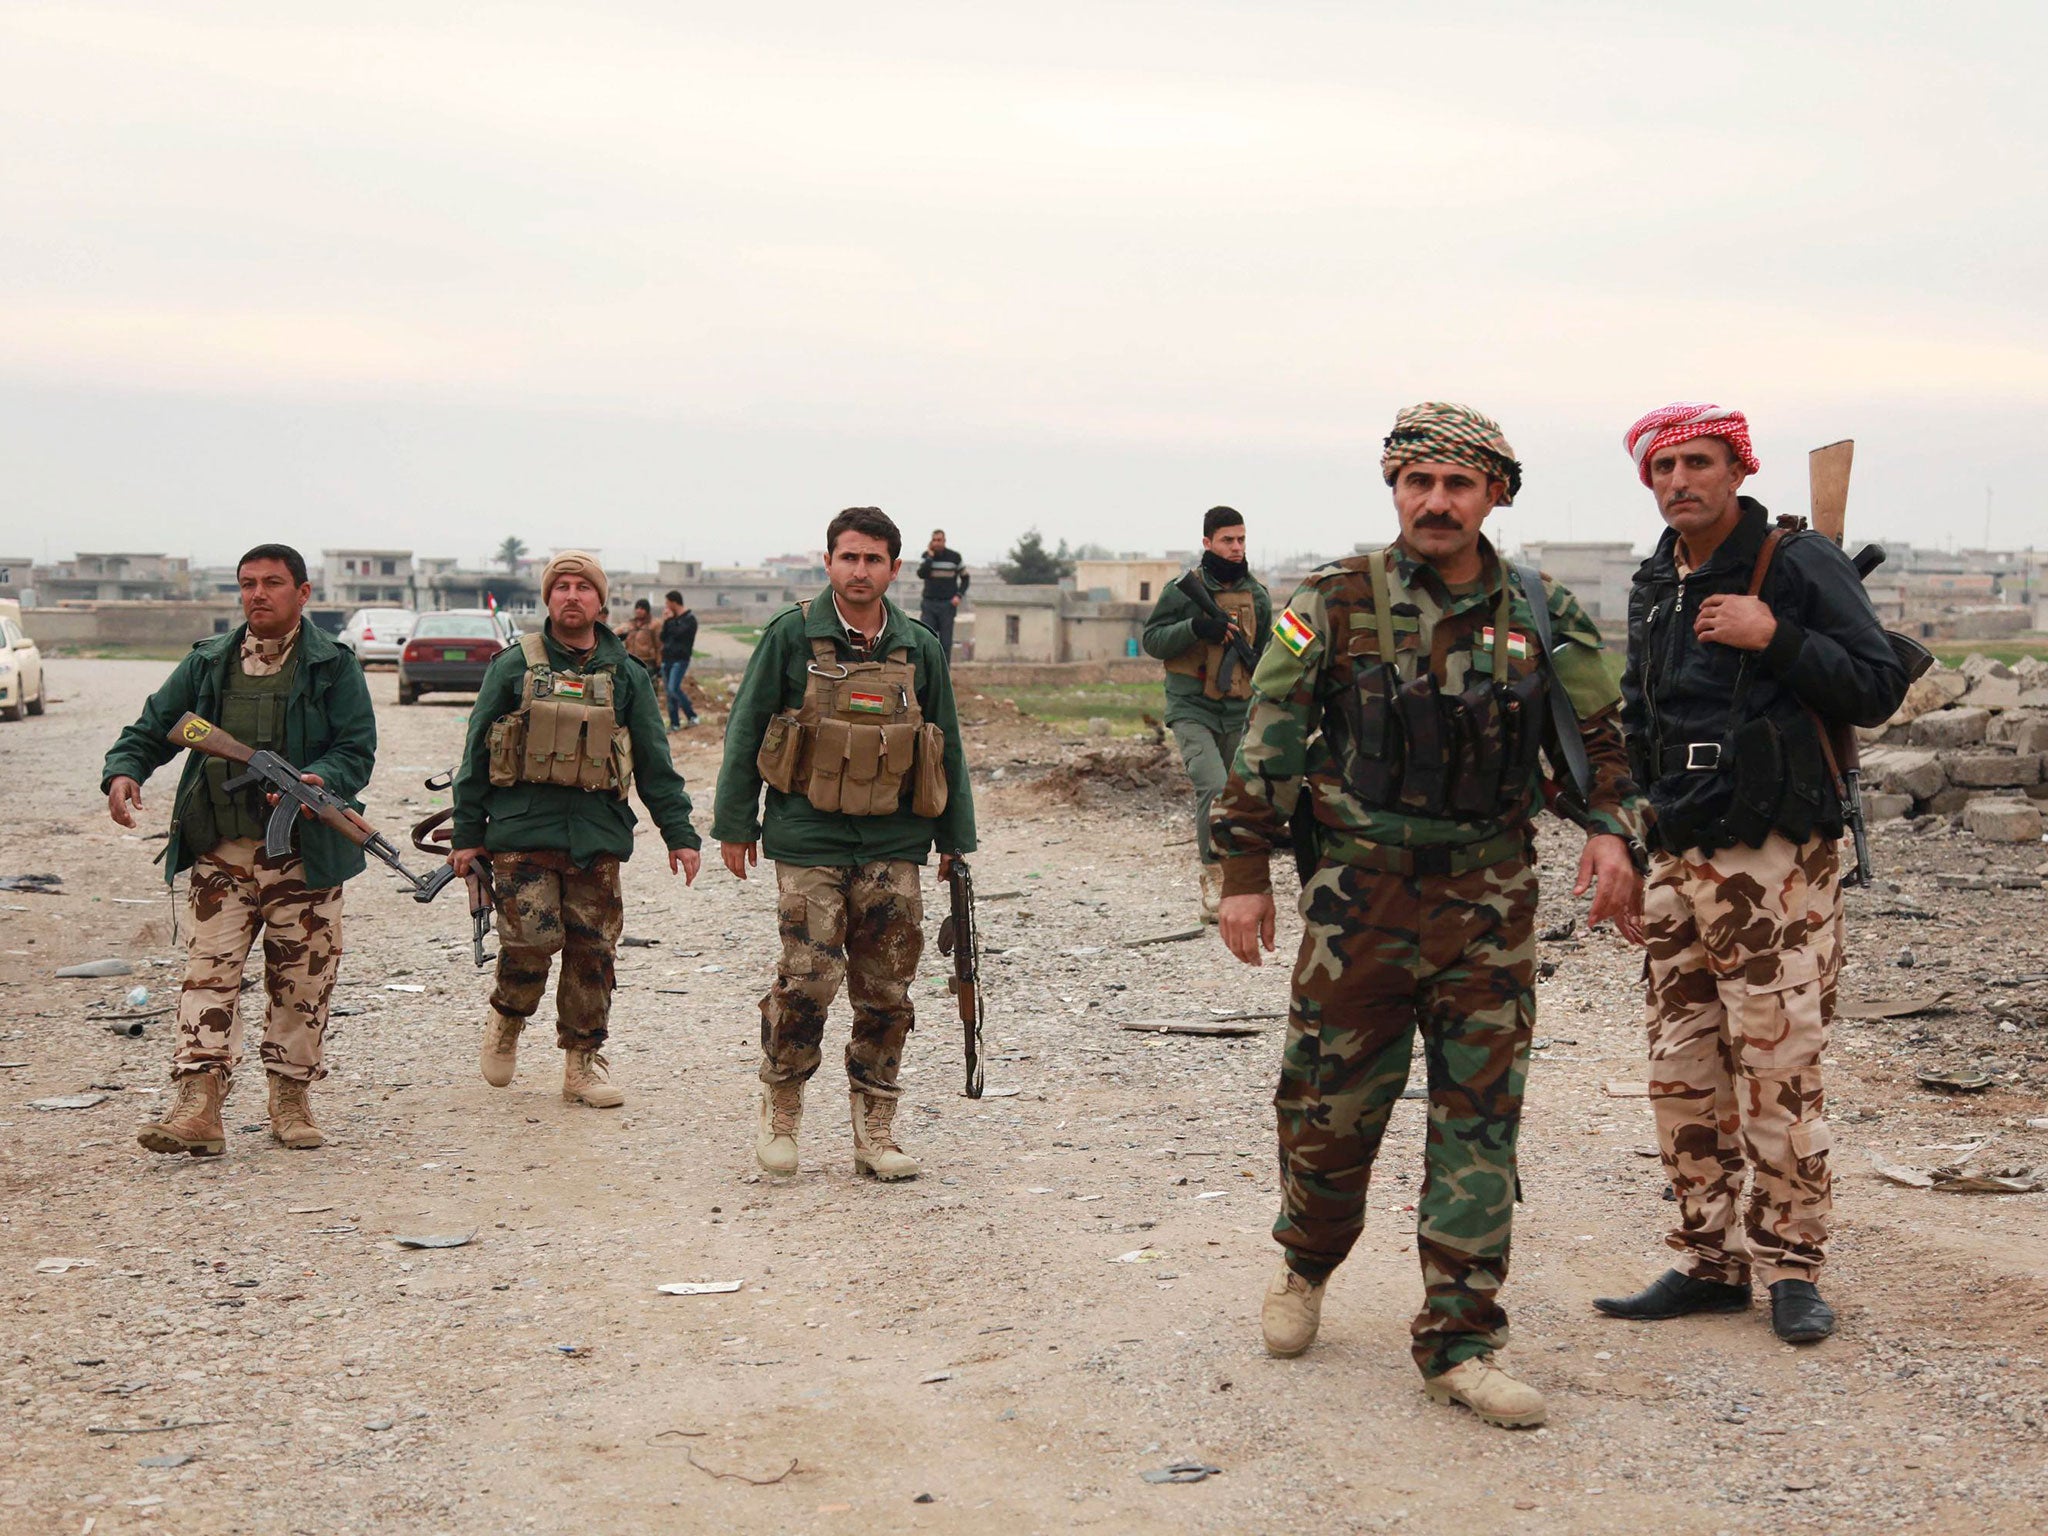 Kurdish peshmerga fighters have fought their way to Iraq's Sinjar mountain and freed hundreds of people trapped there by Islamic State fighters